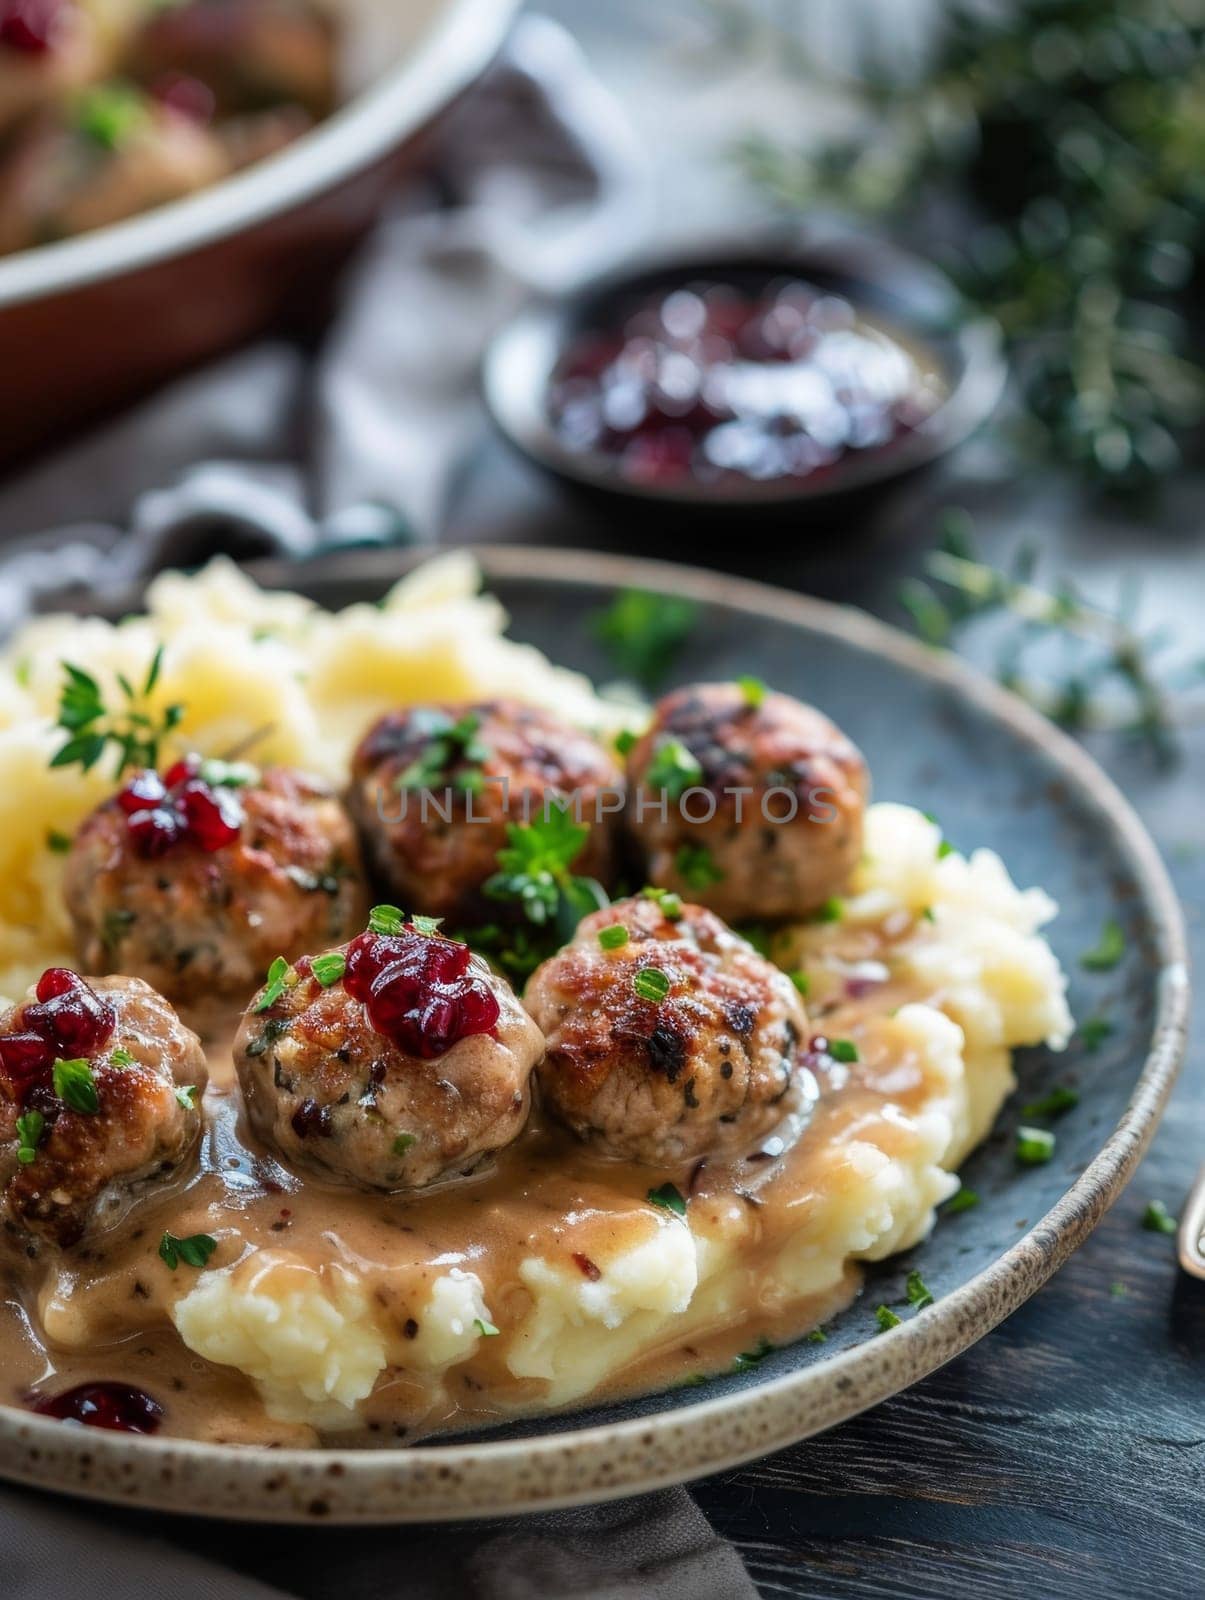 Authentic Swedish meatballs served on a plate with a creamy gravy, accompanied by tangy lingonberry jam and fluffy mashed potatoes - a comforting, traditional dish of Swedish cuisine